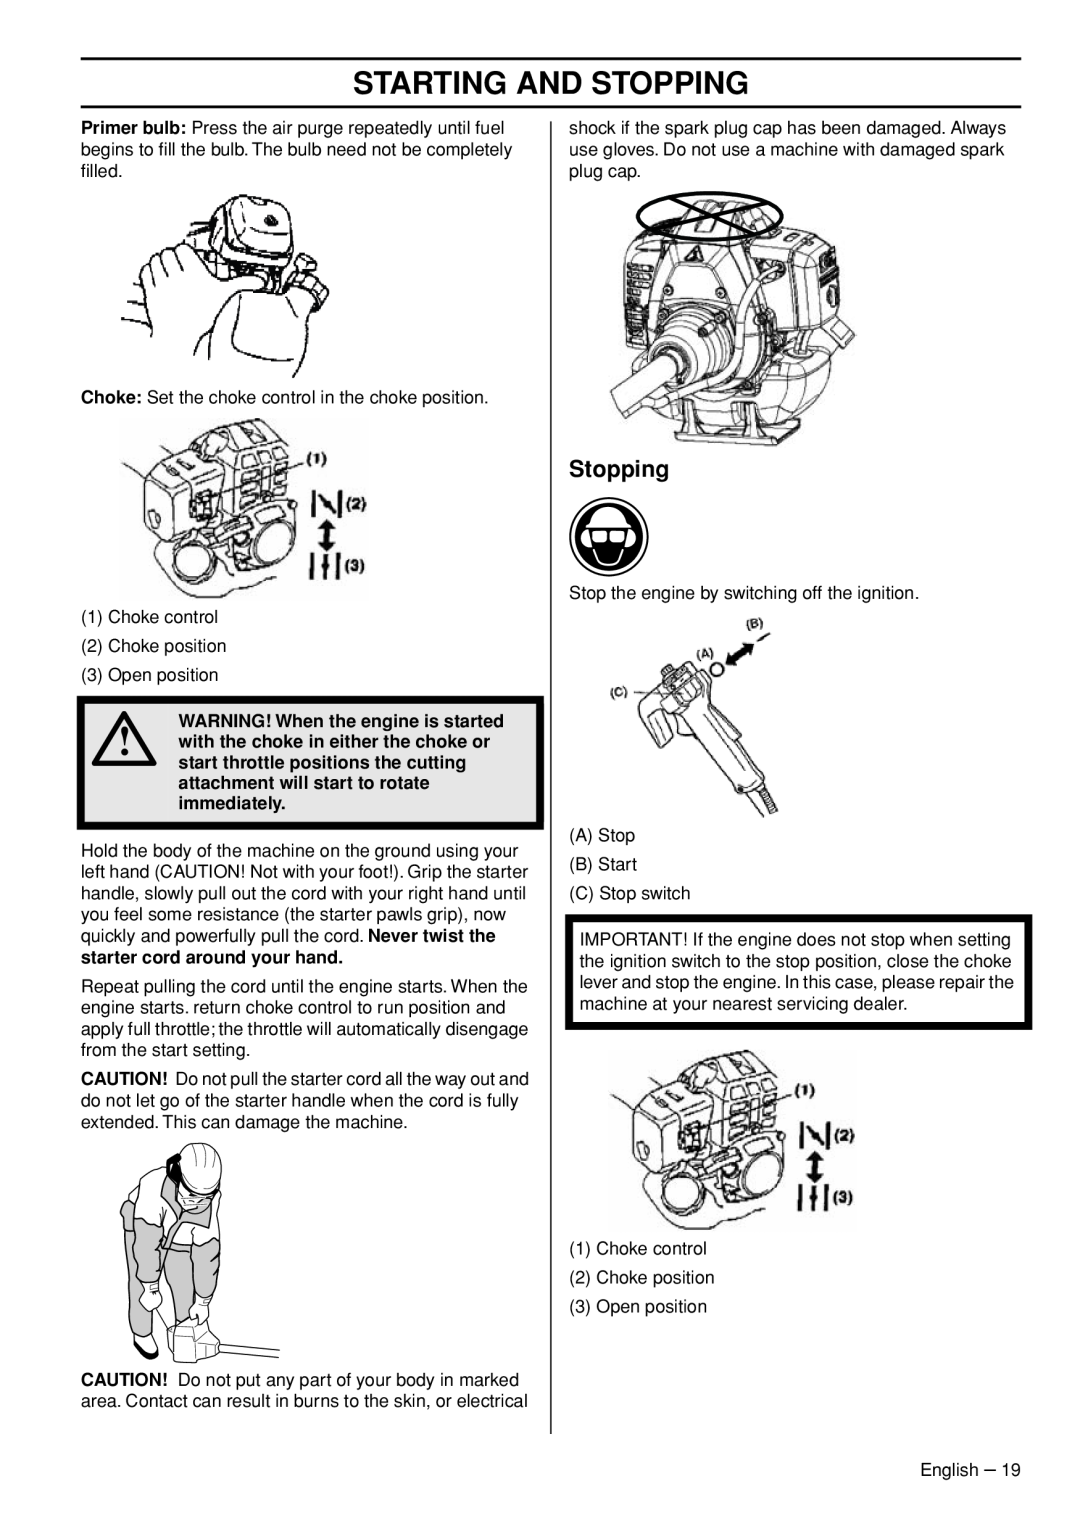 Husqvarna 143R-II manual WARNING! When the engine is started, starter cord around your hand, Starting And Stopping 